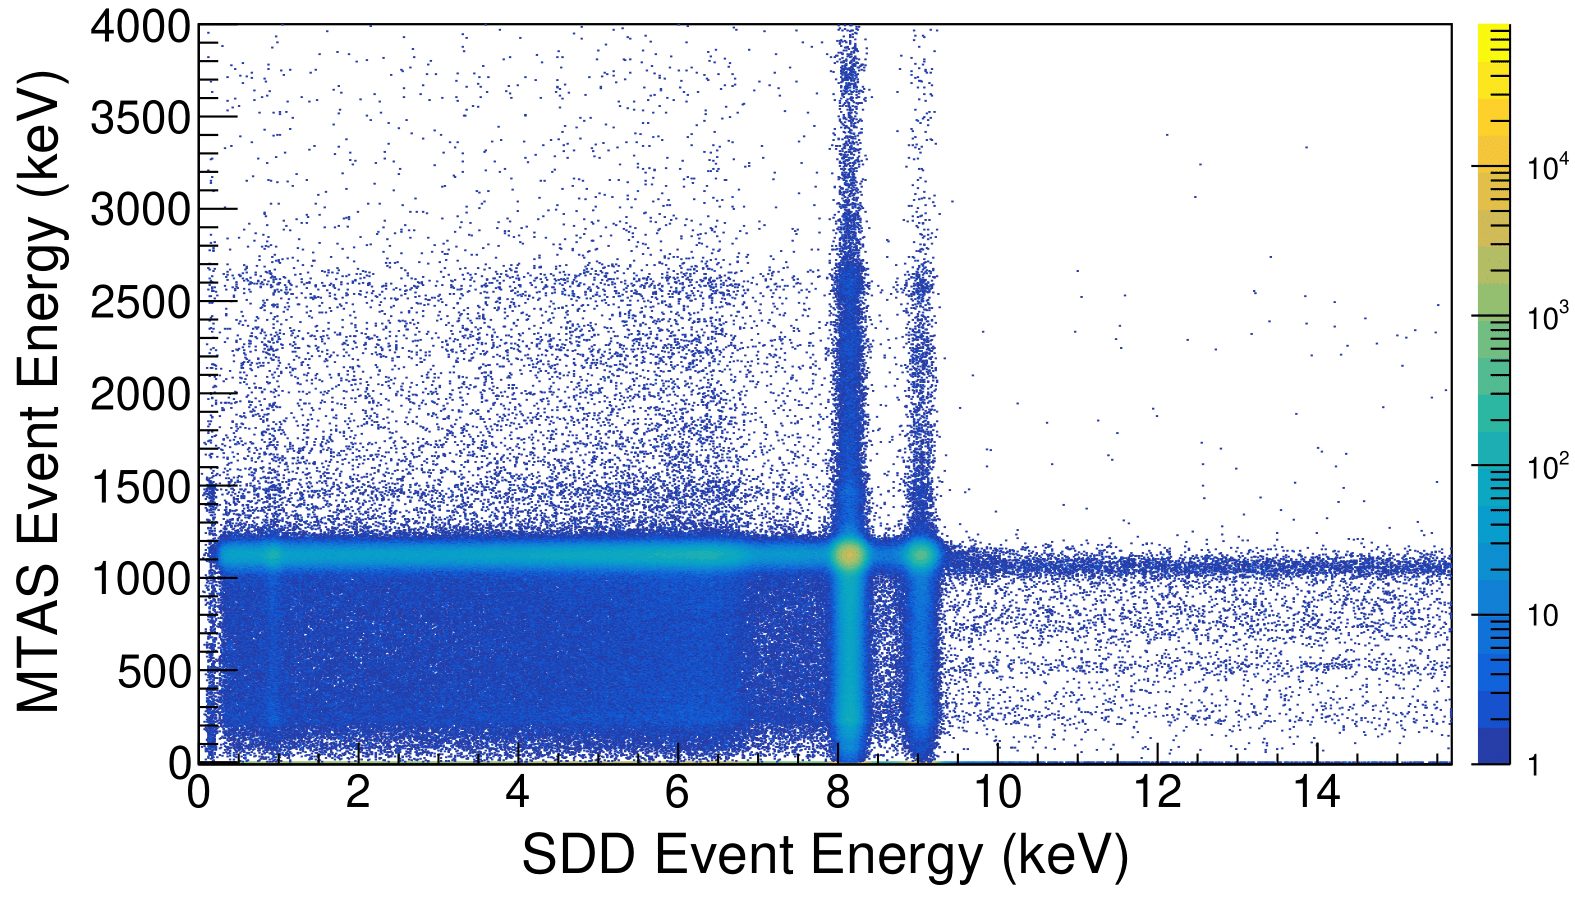 A graph showing a coincidence spectrum in blue (low) to yellow (high) against MTAS Event Energy (keV) on the vertical axis and SDD Event Energy (keV) on the horizontal axis. The vertical axis is 0-4000, the horizontal axis is 0-15, and the colour bar on the right is 1 (dark blue) to approximately 100,000 (bright yellow). There are three discernable lines on the plot created by data points at approximately 8 and 9 on the horizontal axis (vertical lines), and 1100 on the vertical axis (horizontal line). The parameter space beneath 1100 and to the left of 8 is mostly dark blue with the outside lines becoming light teal, and the point (8,1100) is yellow.